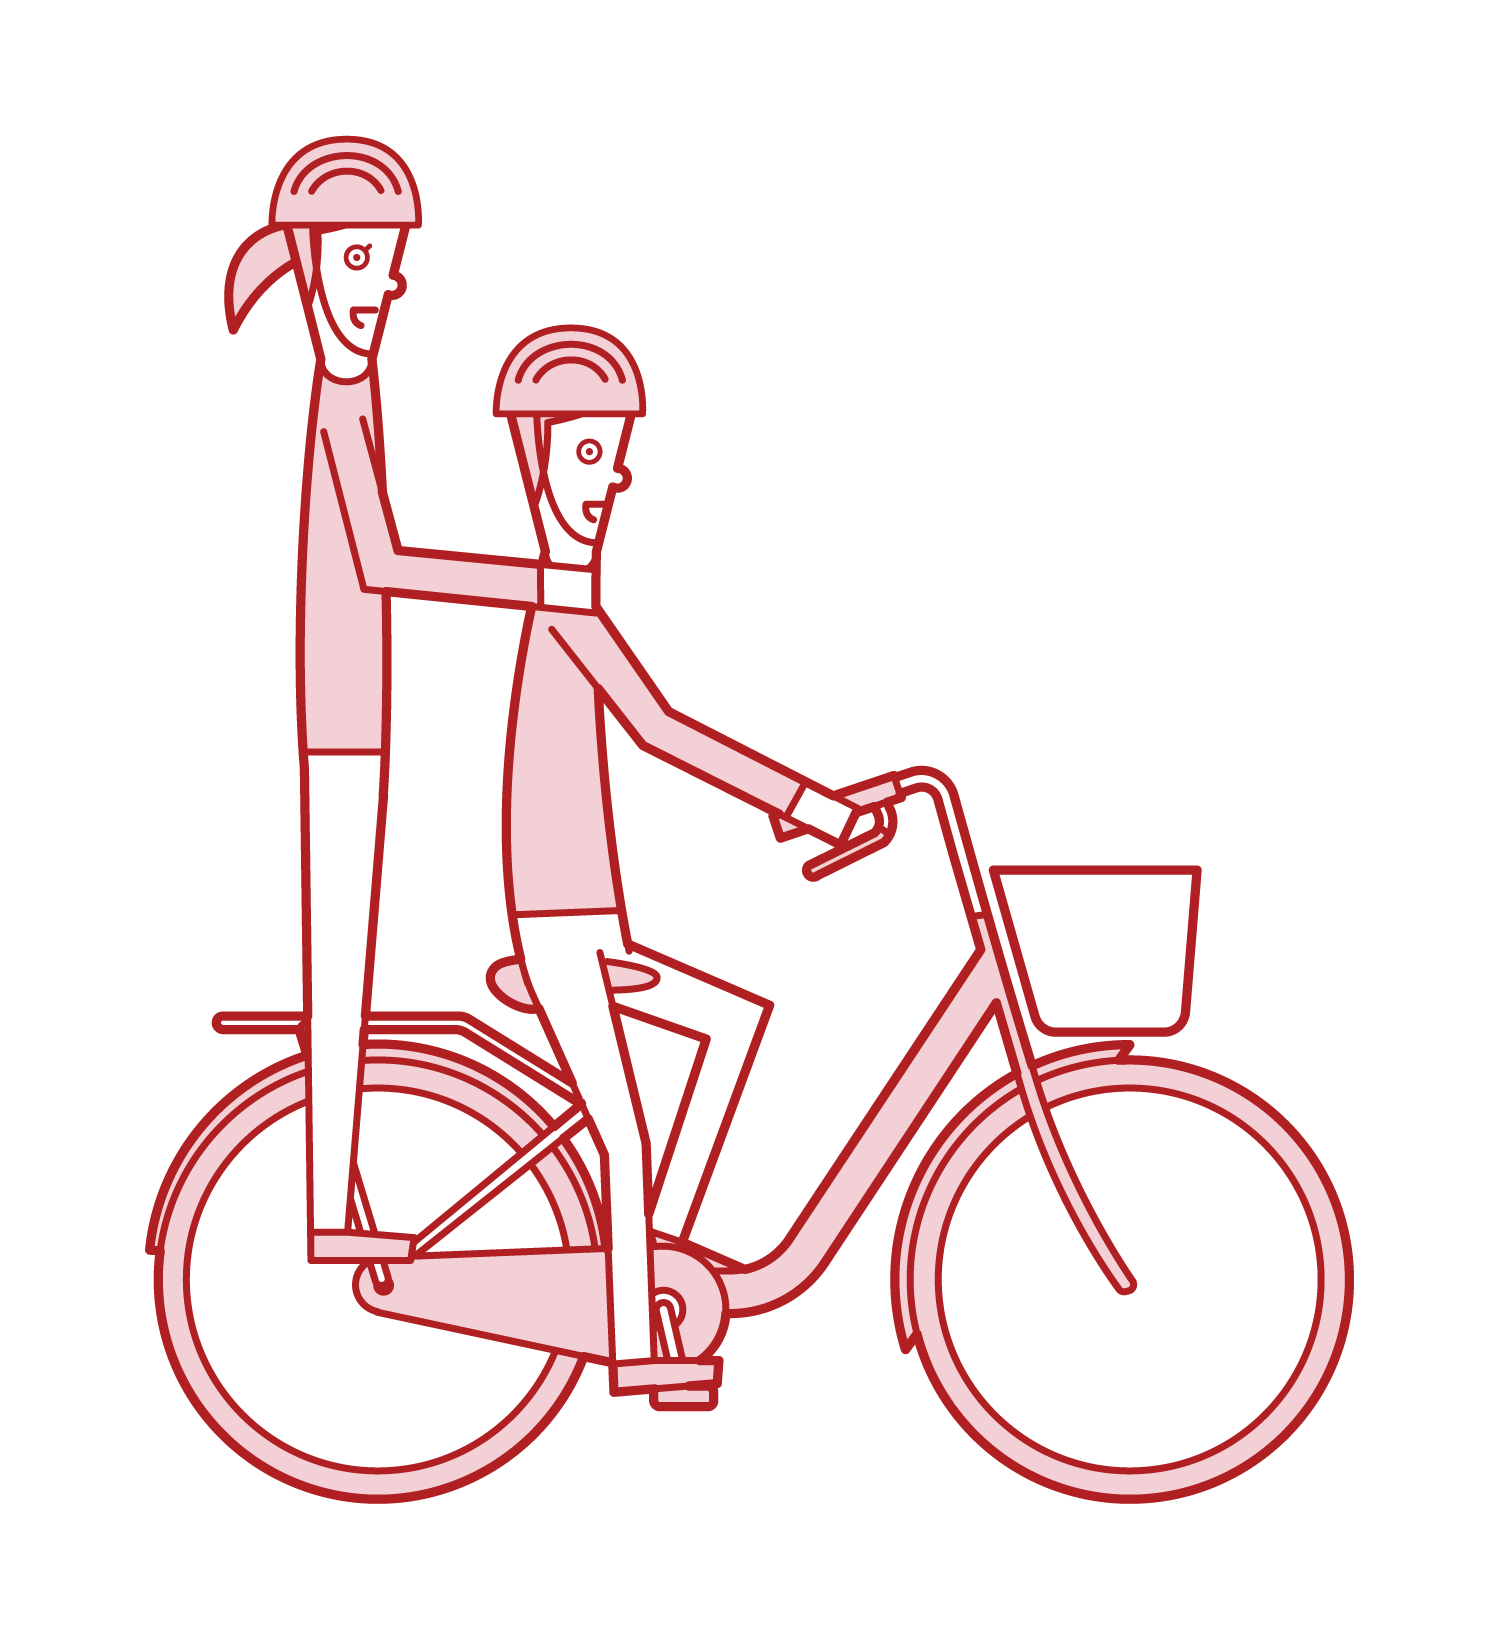 Illustration of two-seater people on a bicycle